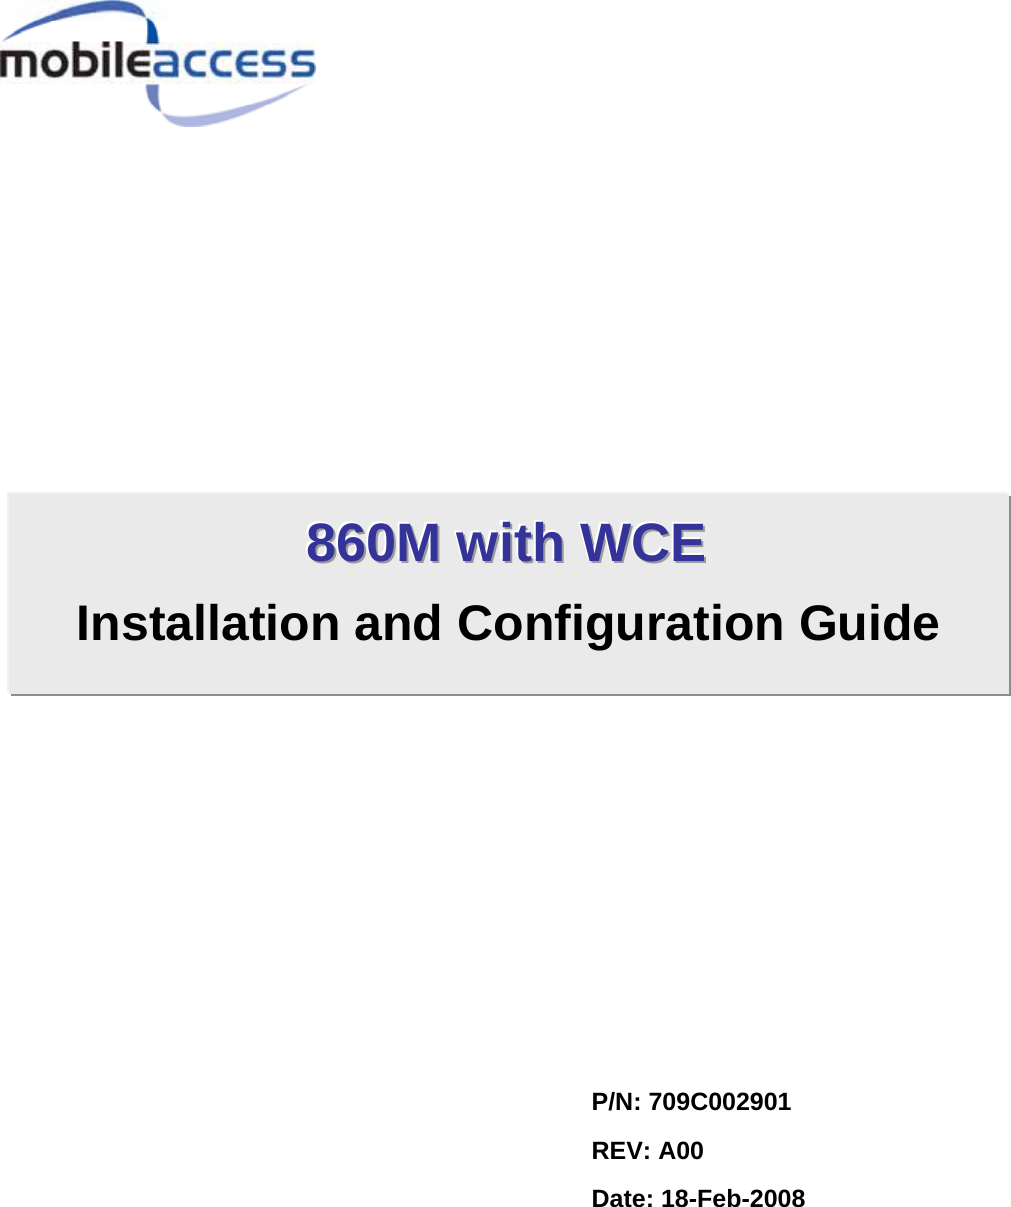                                            P/N: 709C002901 REV: A00 Date: 18-Feb-2008 888666000MMM   wwwiiittthhh   WWWCCCEEE   Installation and Configuration Guide   